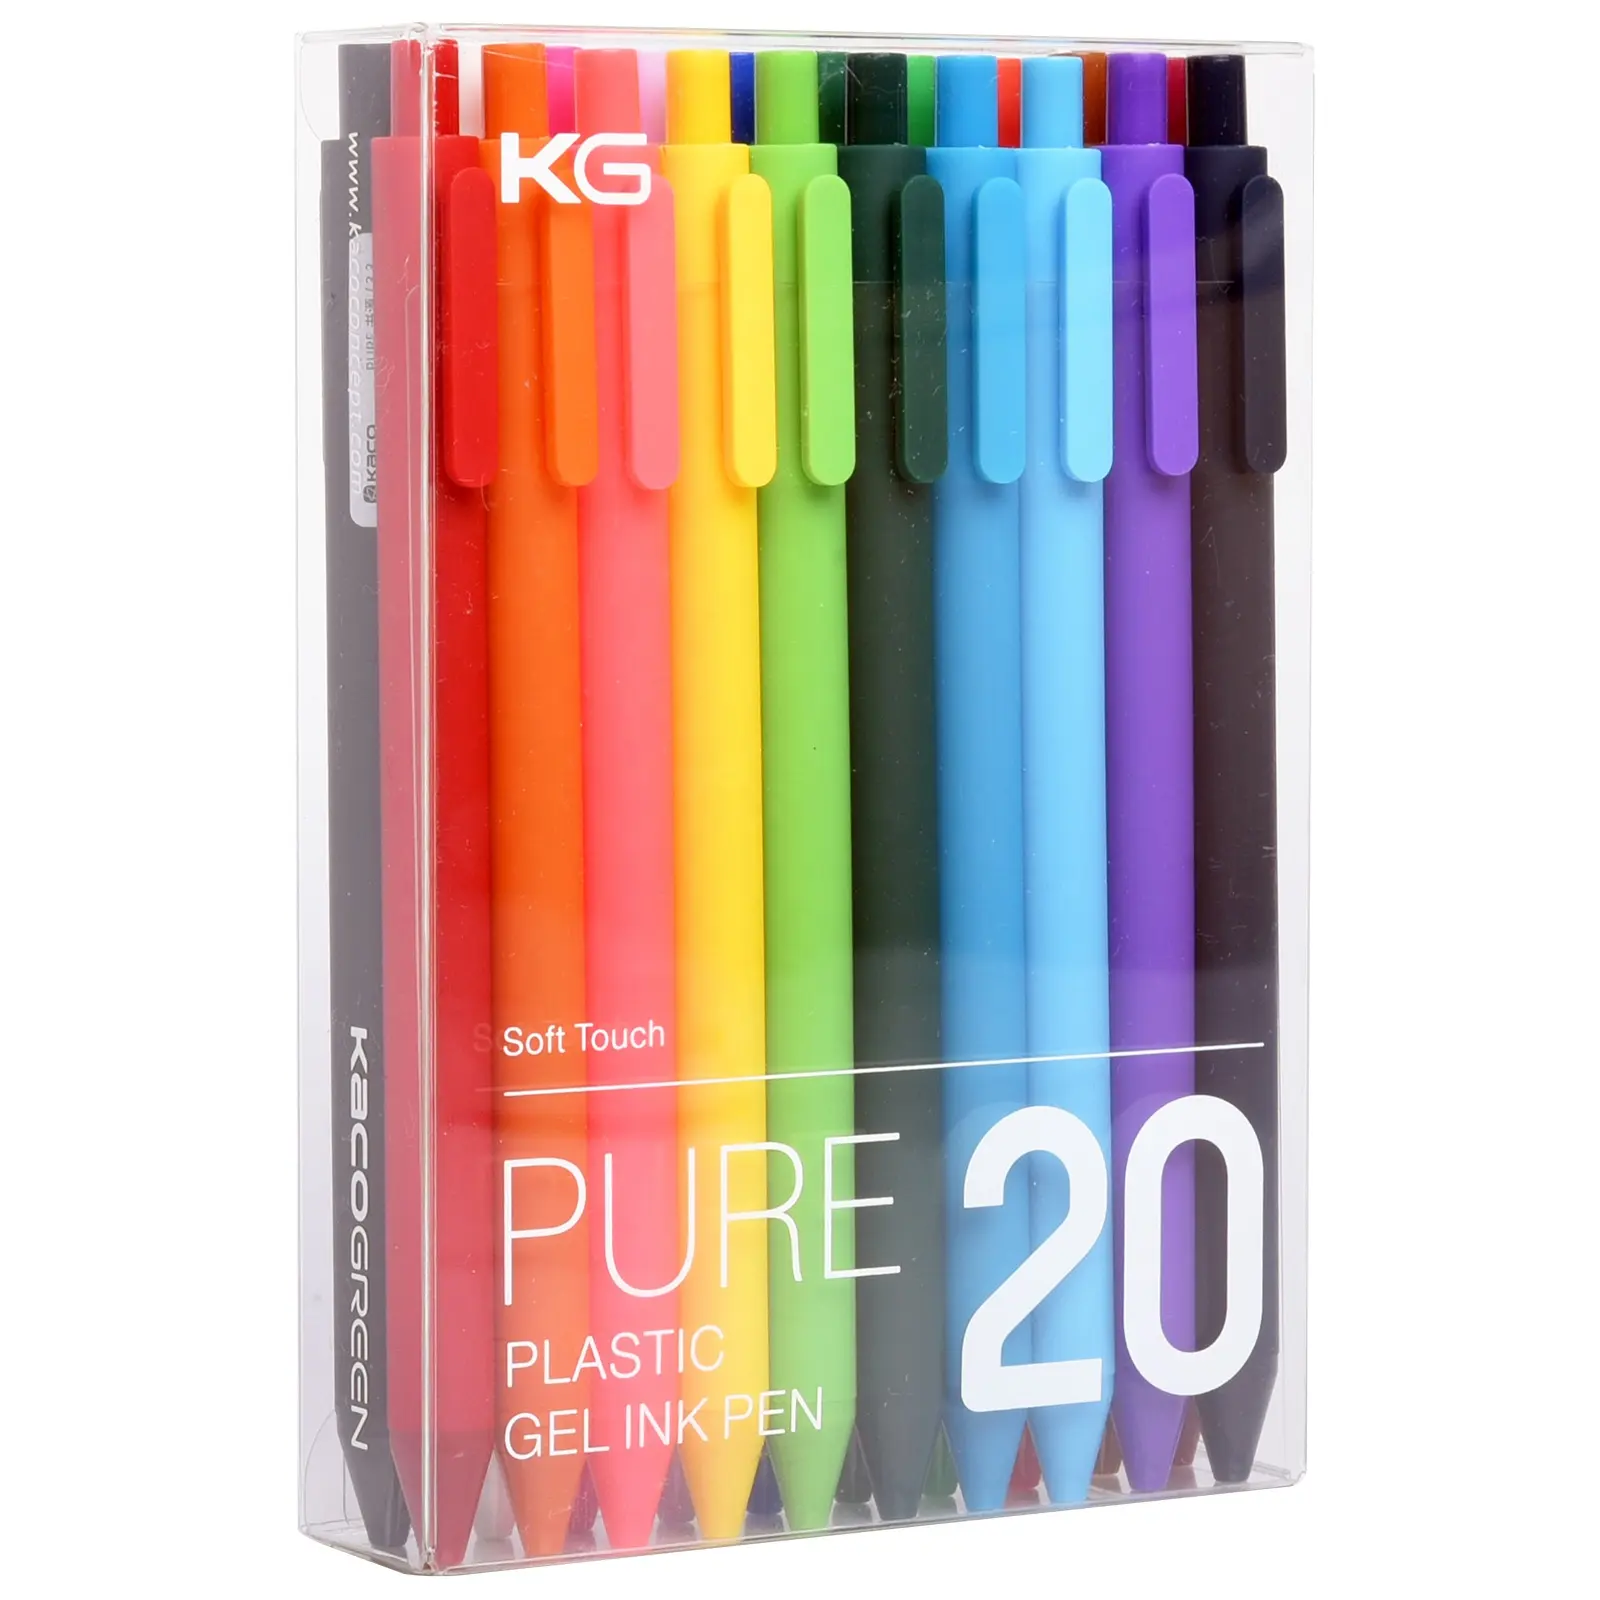 KACO PURE Retractable Refillable Gel Ink Pens 0.5mm Fine Point 5 Colors Set Colored Ink